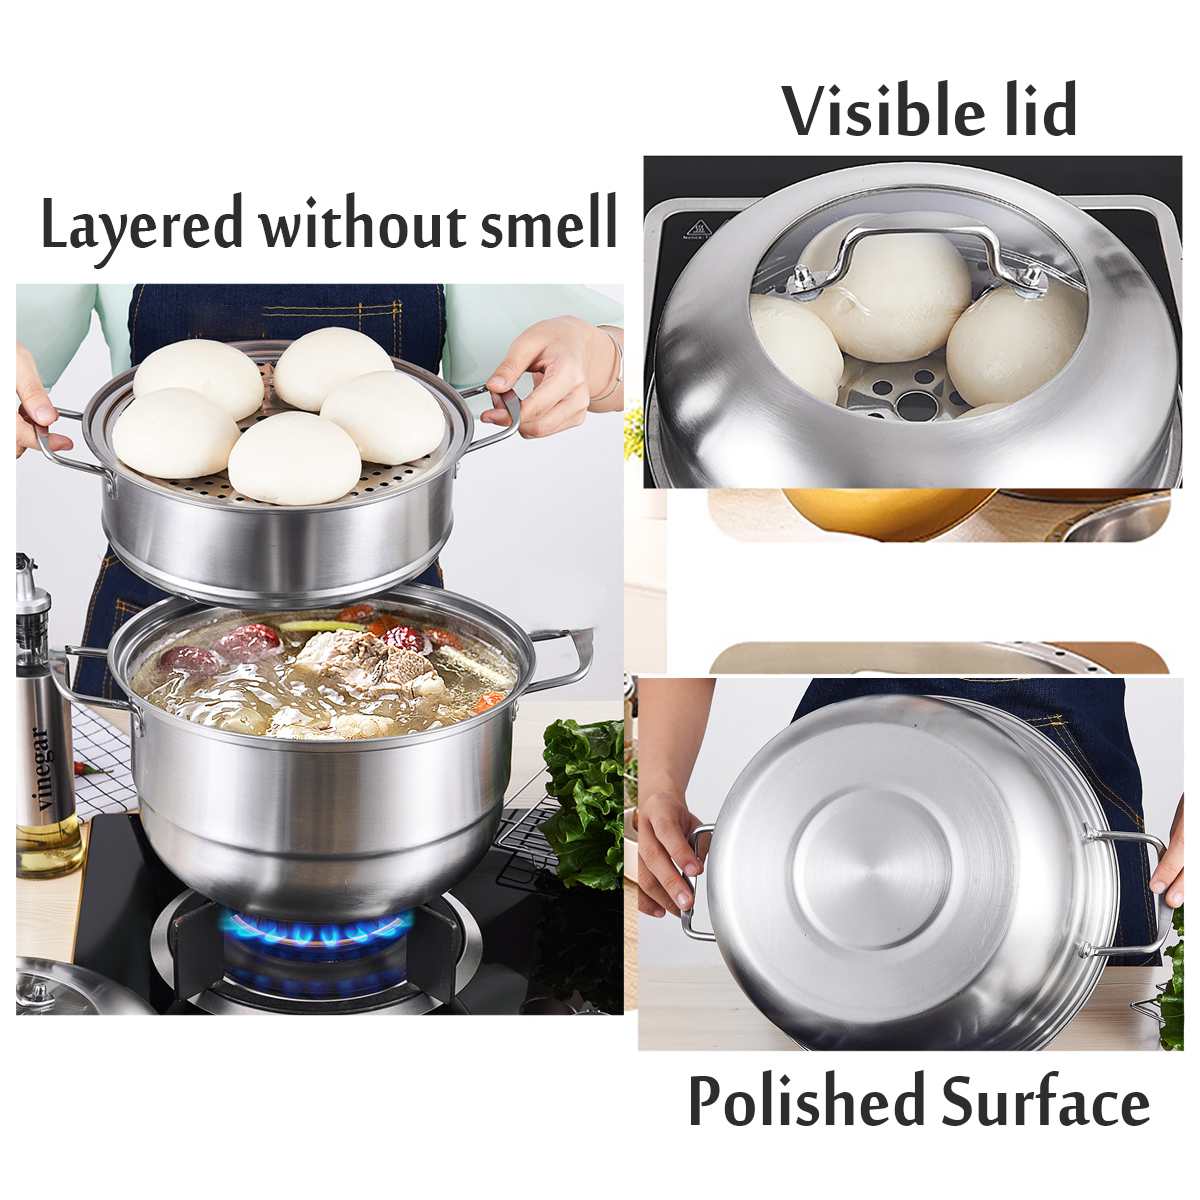 28cm Stainless Steel Boiler Soup Pot Two Three Layer Thick Steamer Pot Universal Cooking Pots for Induction Cooker Gas Stove